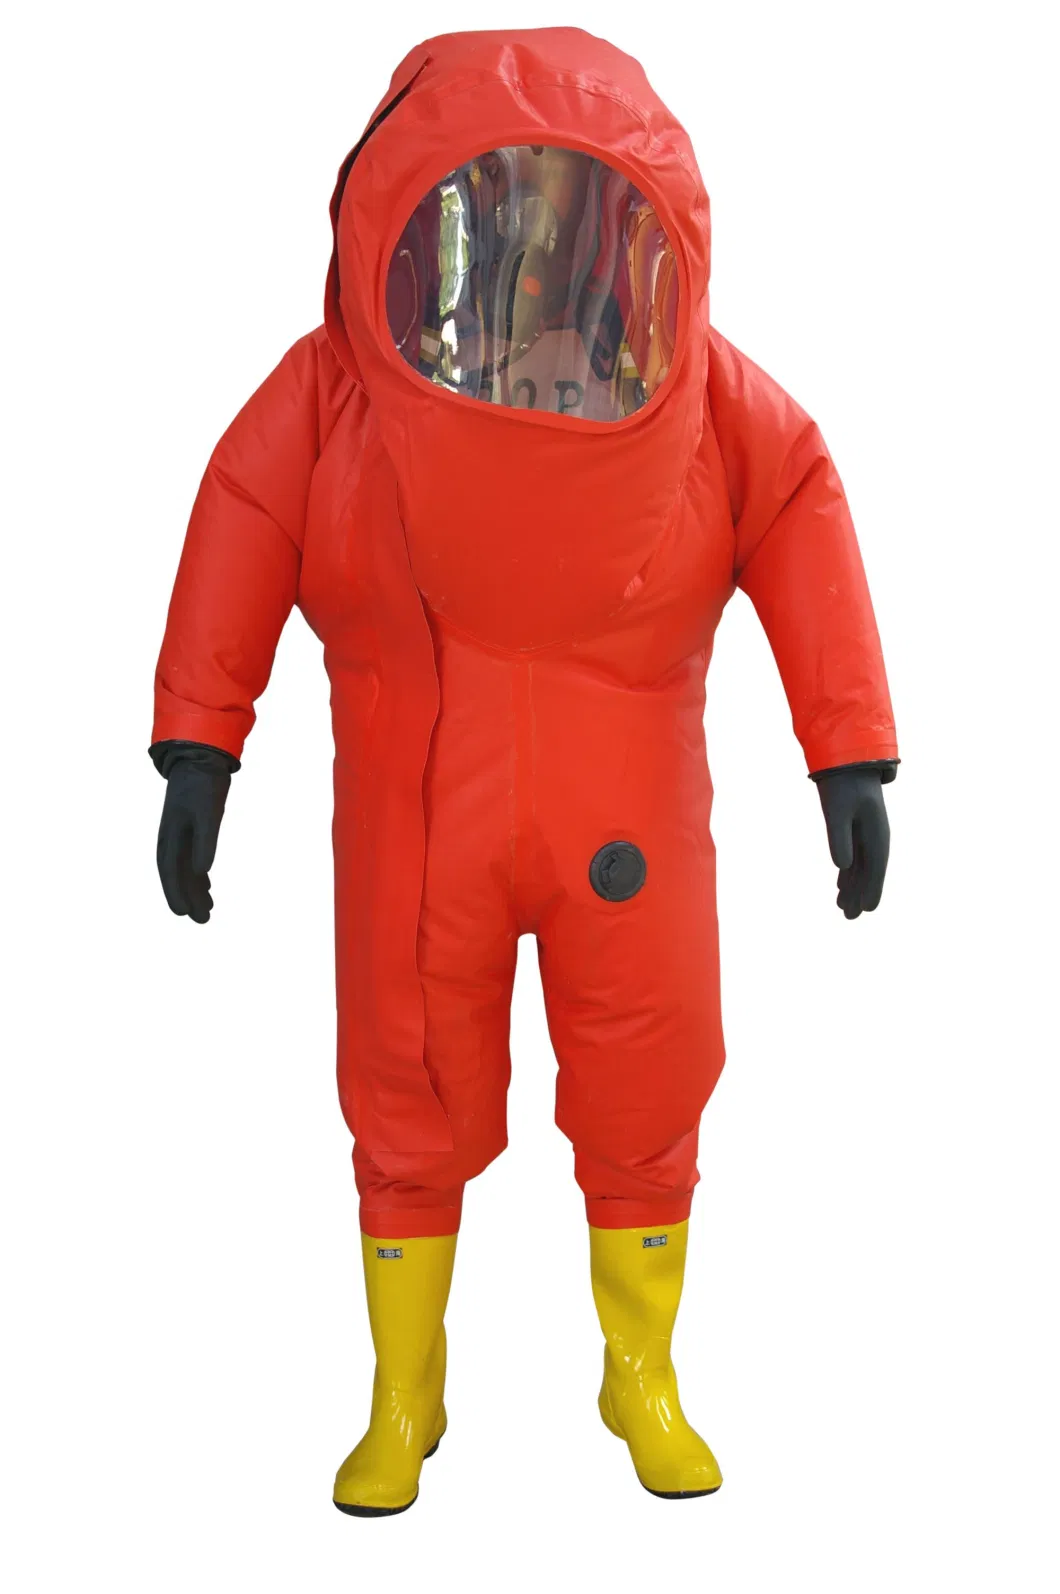 Heavy Duty Totally Enclosed Anti Chemical Protective Clothing Suit